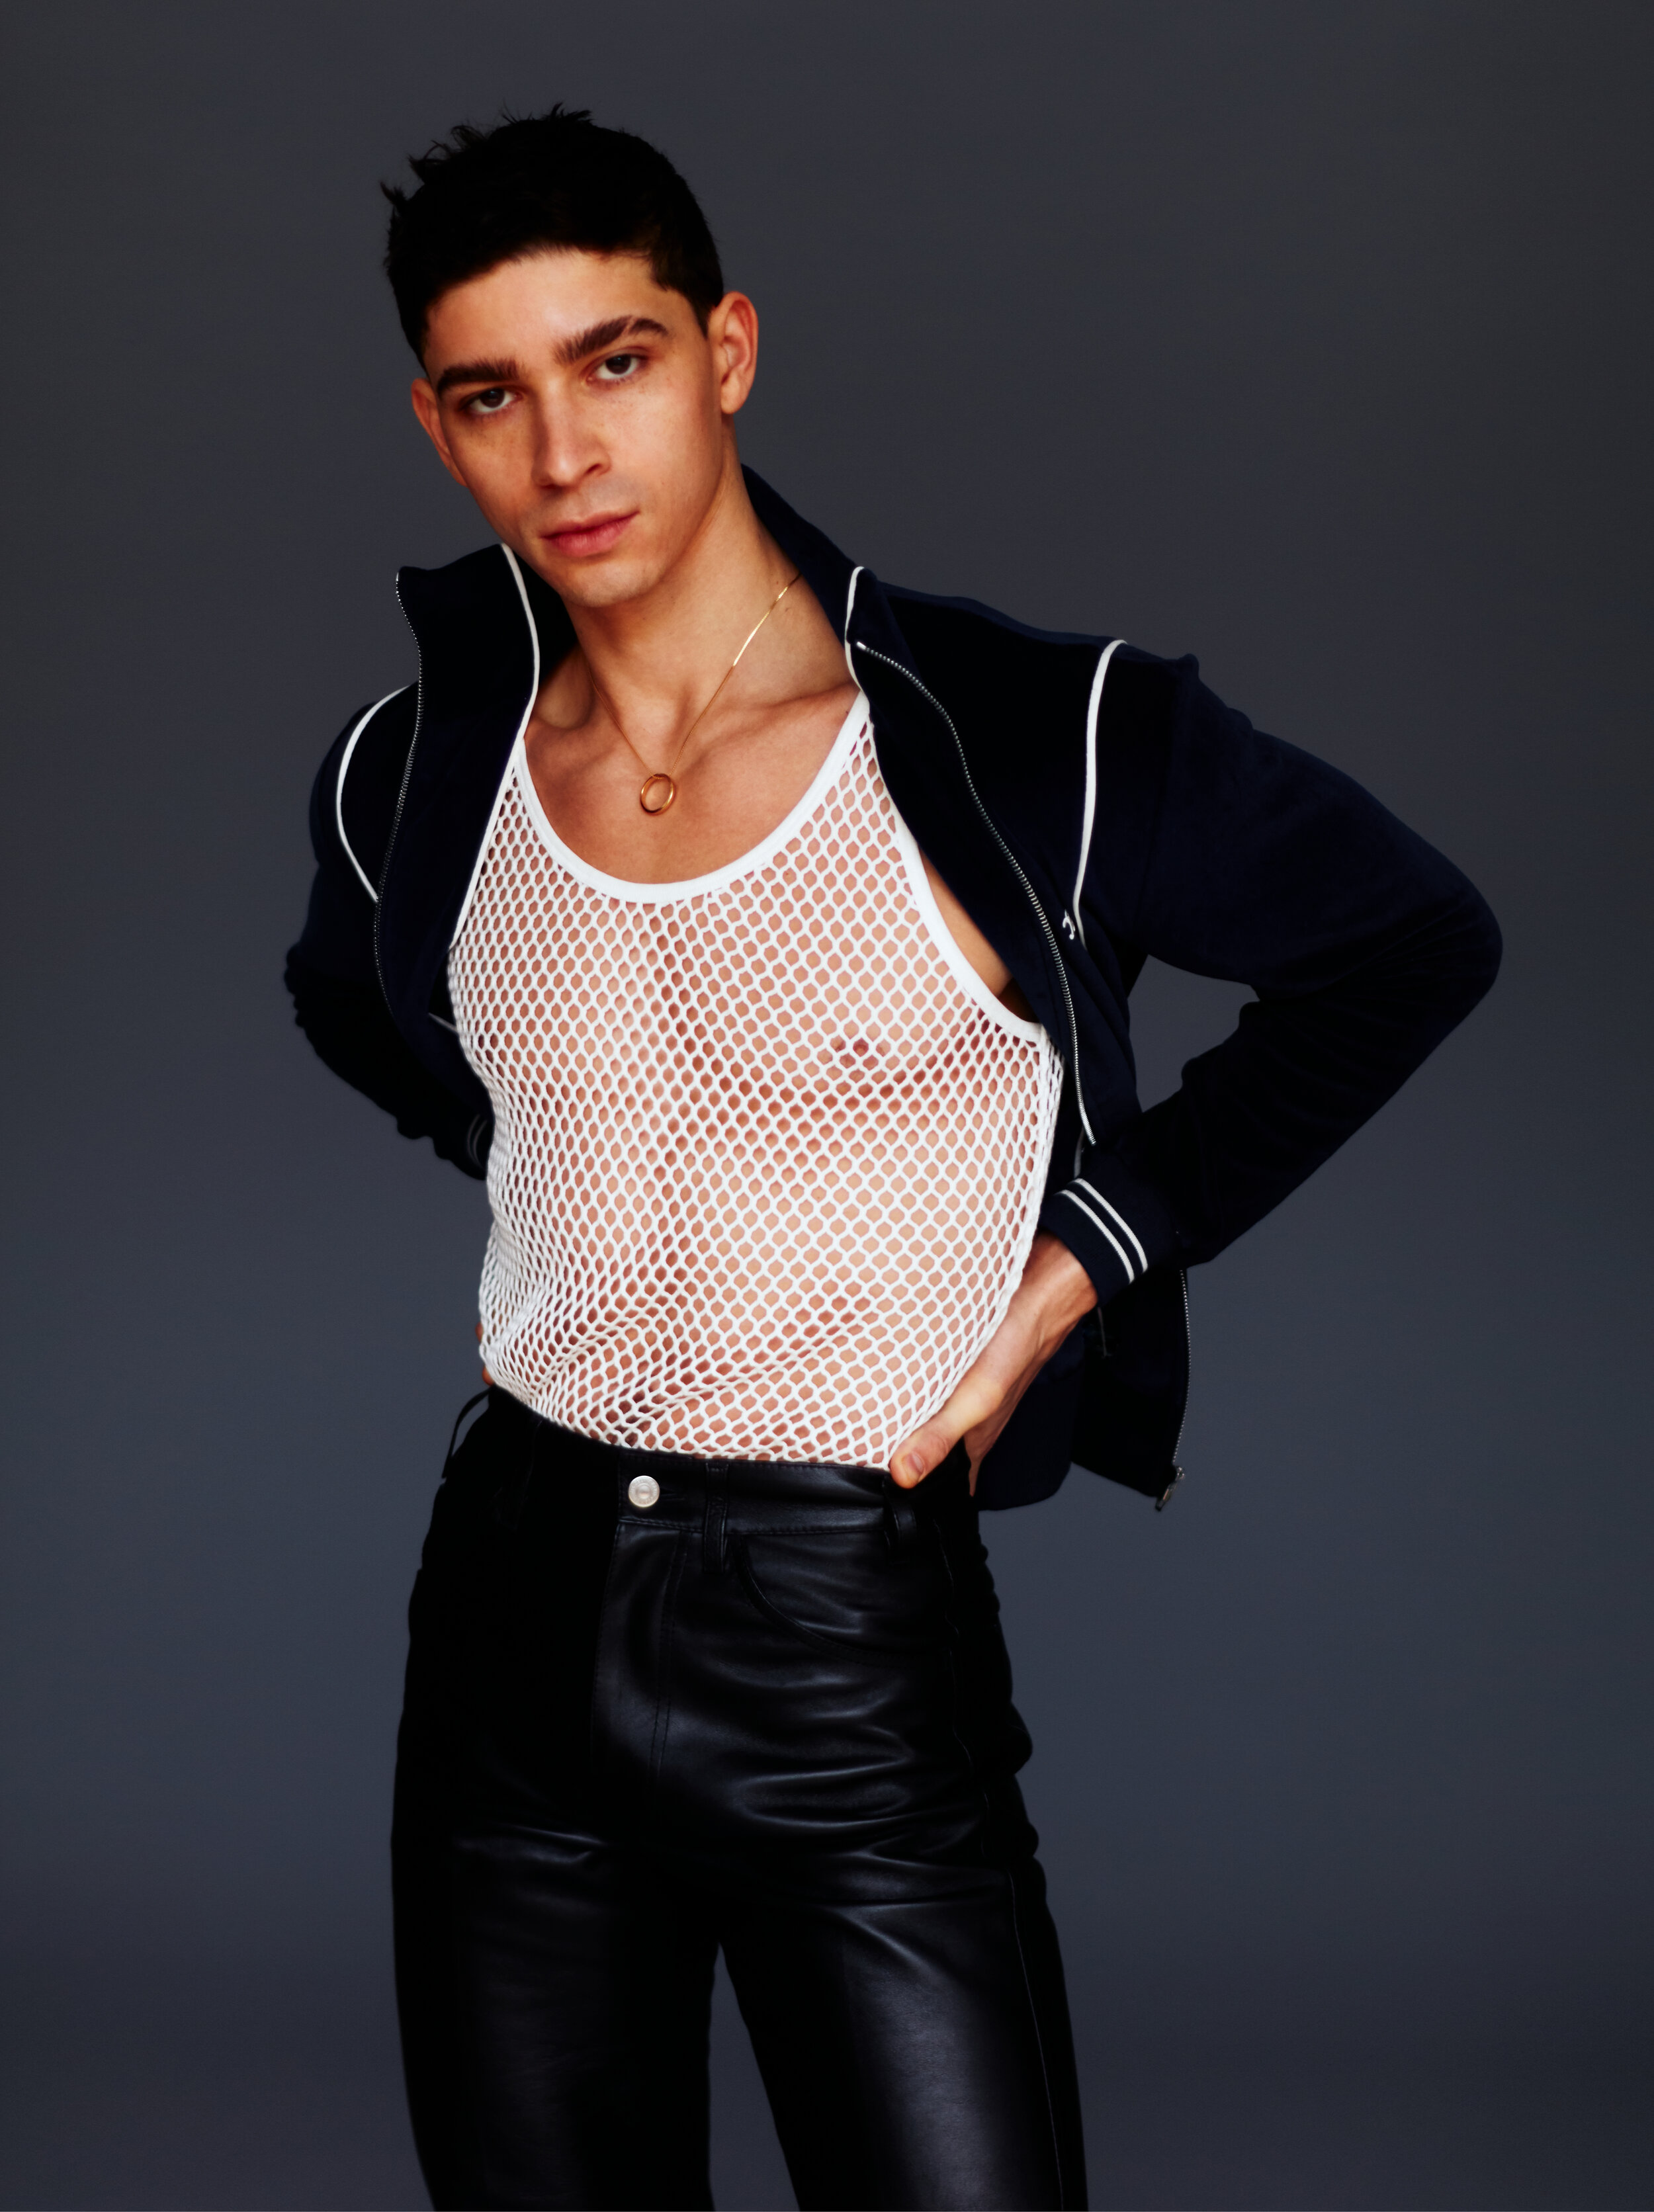   ISAAC COLE POWELL BY CLAUDIO + TOMAS FOR VMAN  